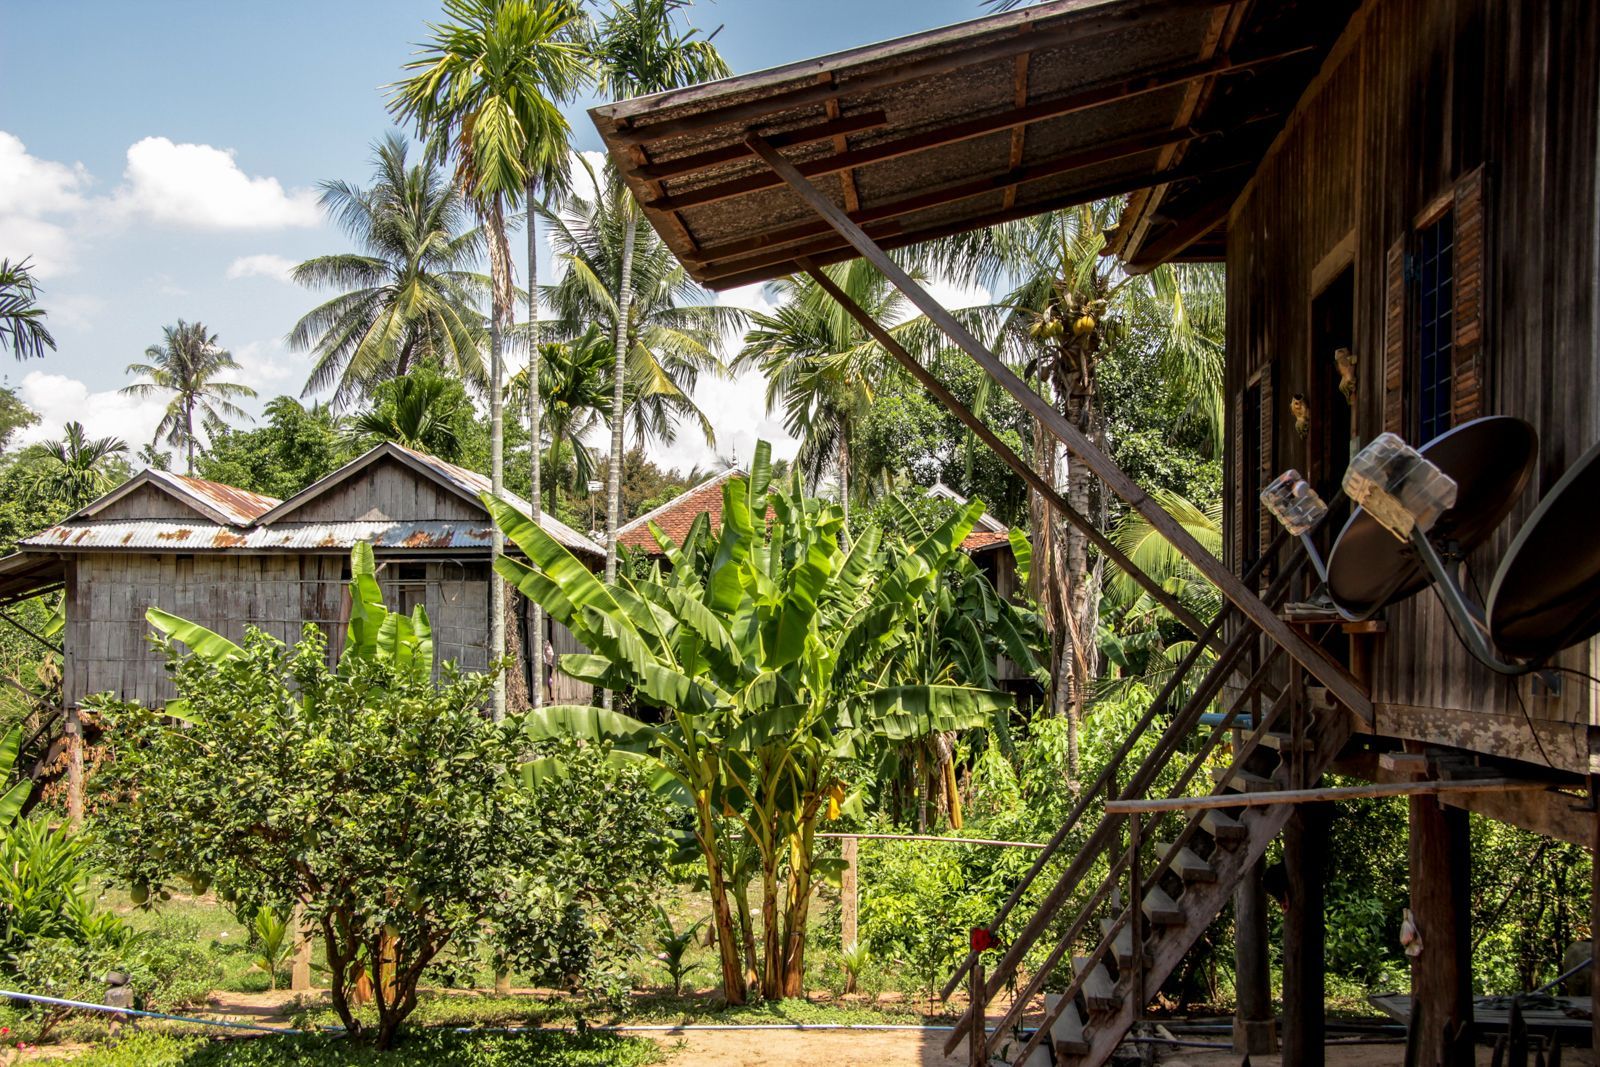 A homestay in on the rural island of Koh Trong, which sits in the middle of the mighty Mekong River in Cambodia. Photo: Easia Travel